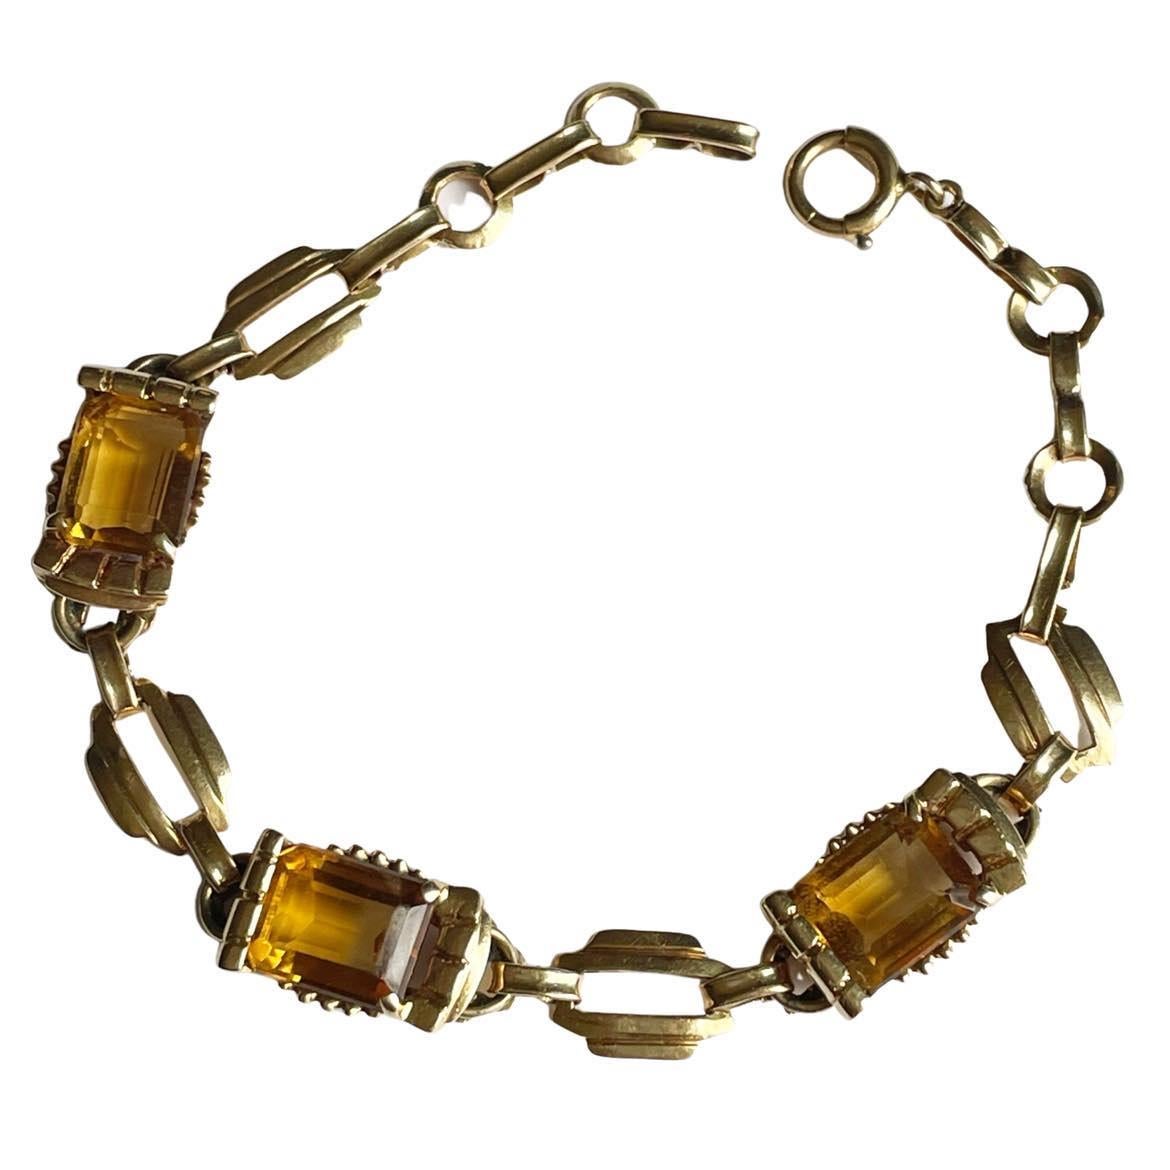 Here we have a beautiful retro link style bracelet. Crafted in 14K yellow gold, the link design is a flatten chain style. Minimal is engraving to not take away from the show piece that is the emerald cut citrine gems. The prong setting is bold,